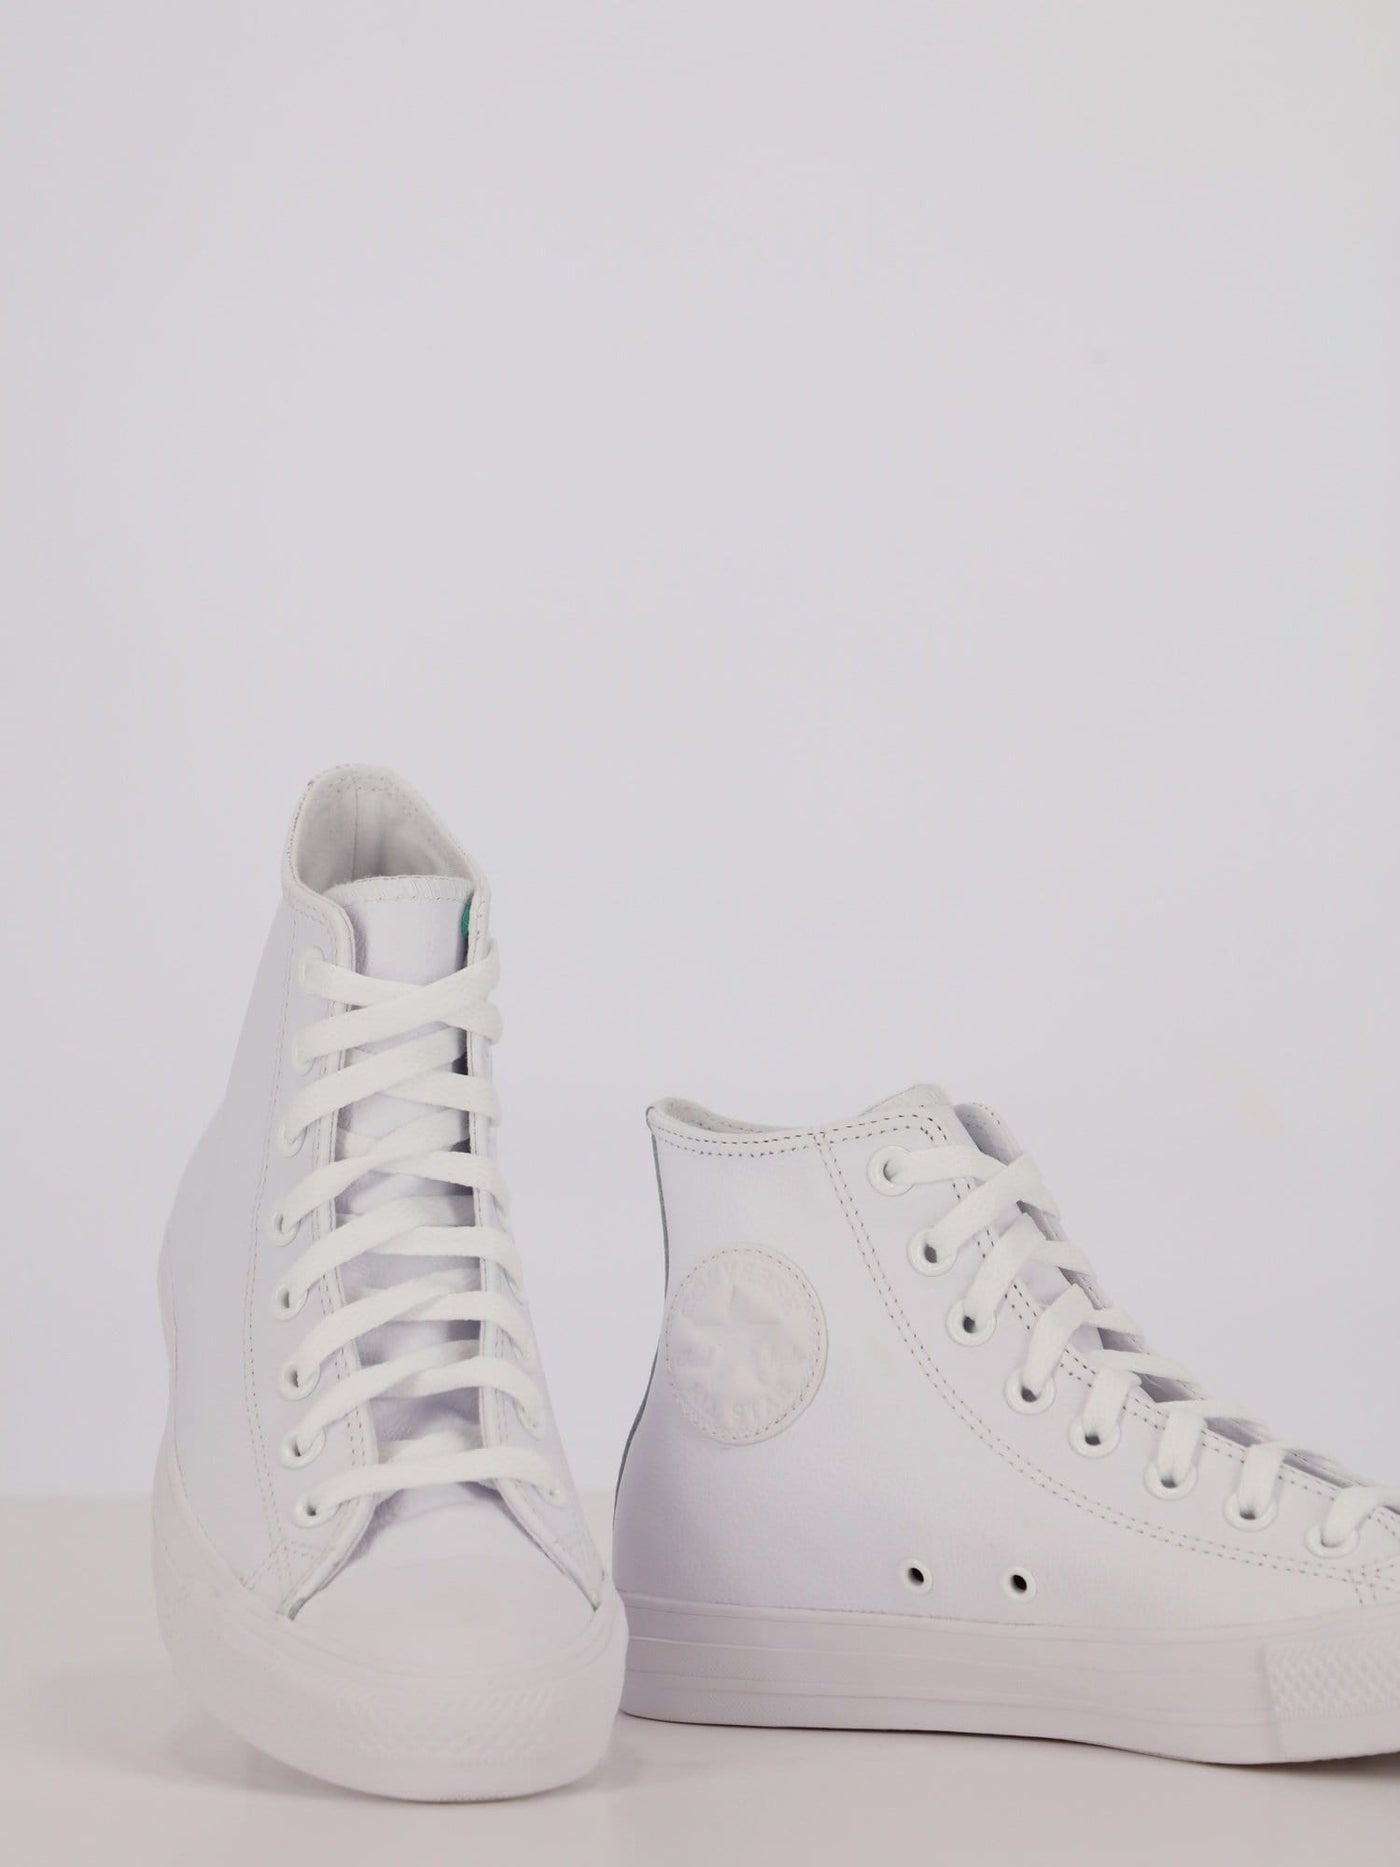 Chuck 70 vs All Star - Which Is the Best Converse Hi Top? | Stridewise